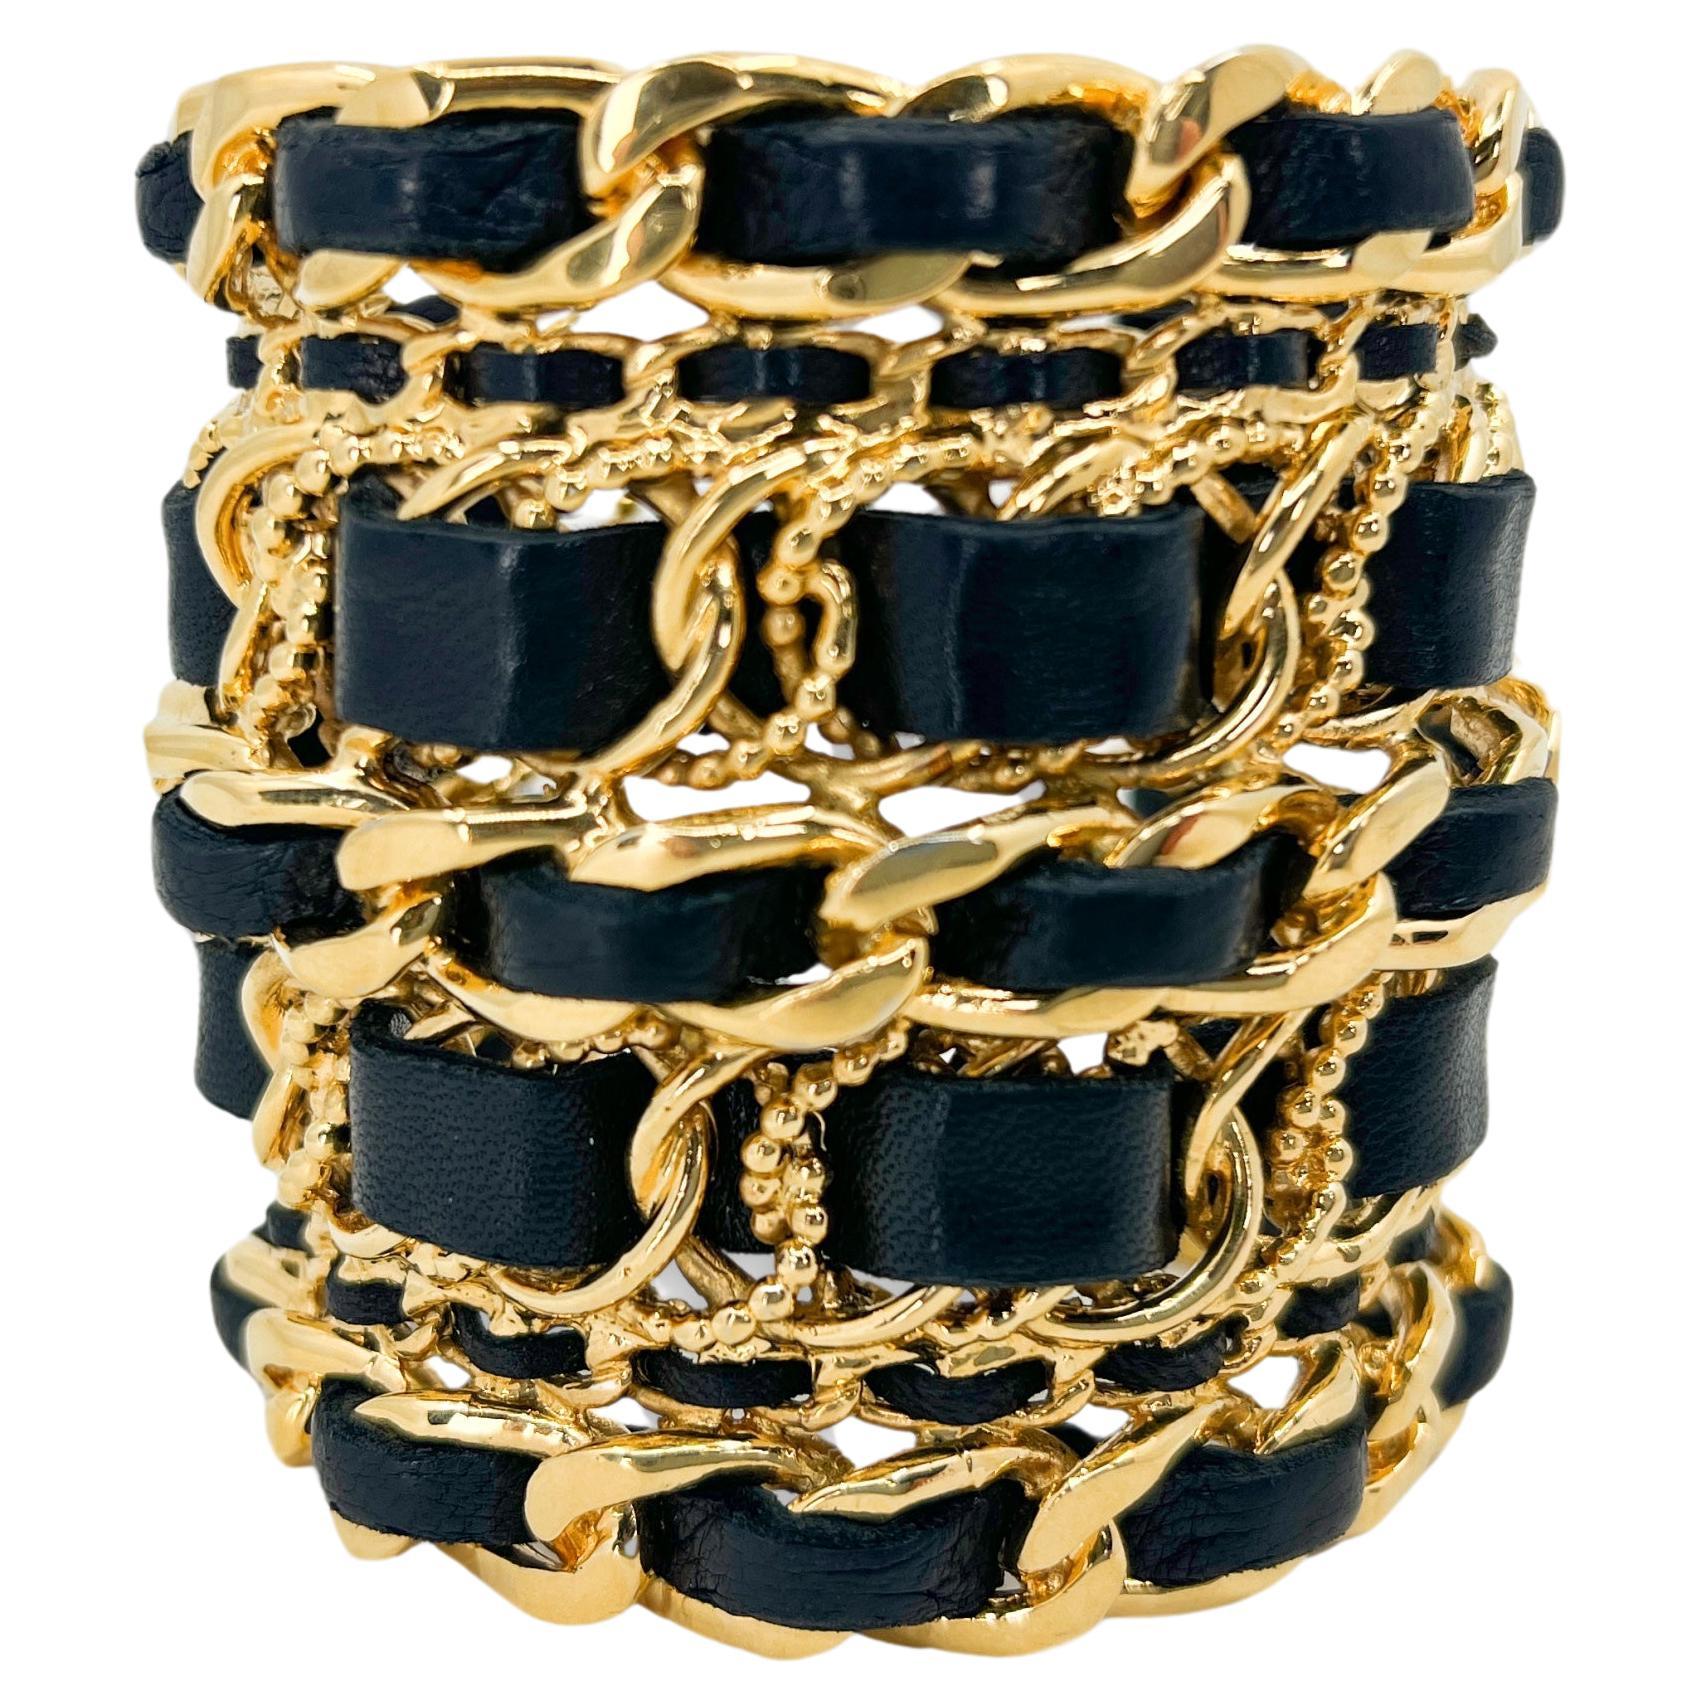 Rare Chanel Collection 26 Vintage Stacked Woven Chain Cuff Bracelet 66974